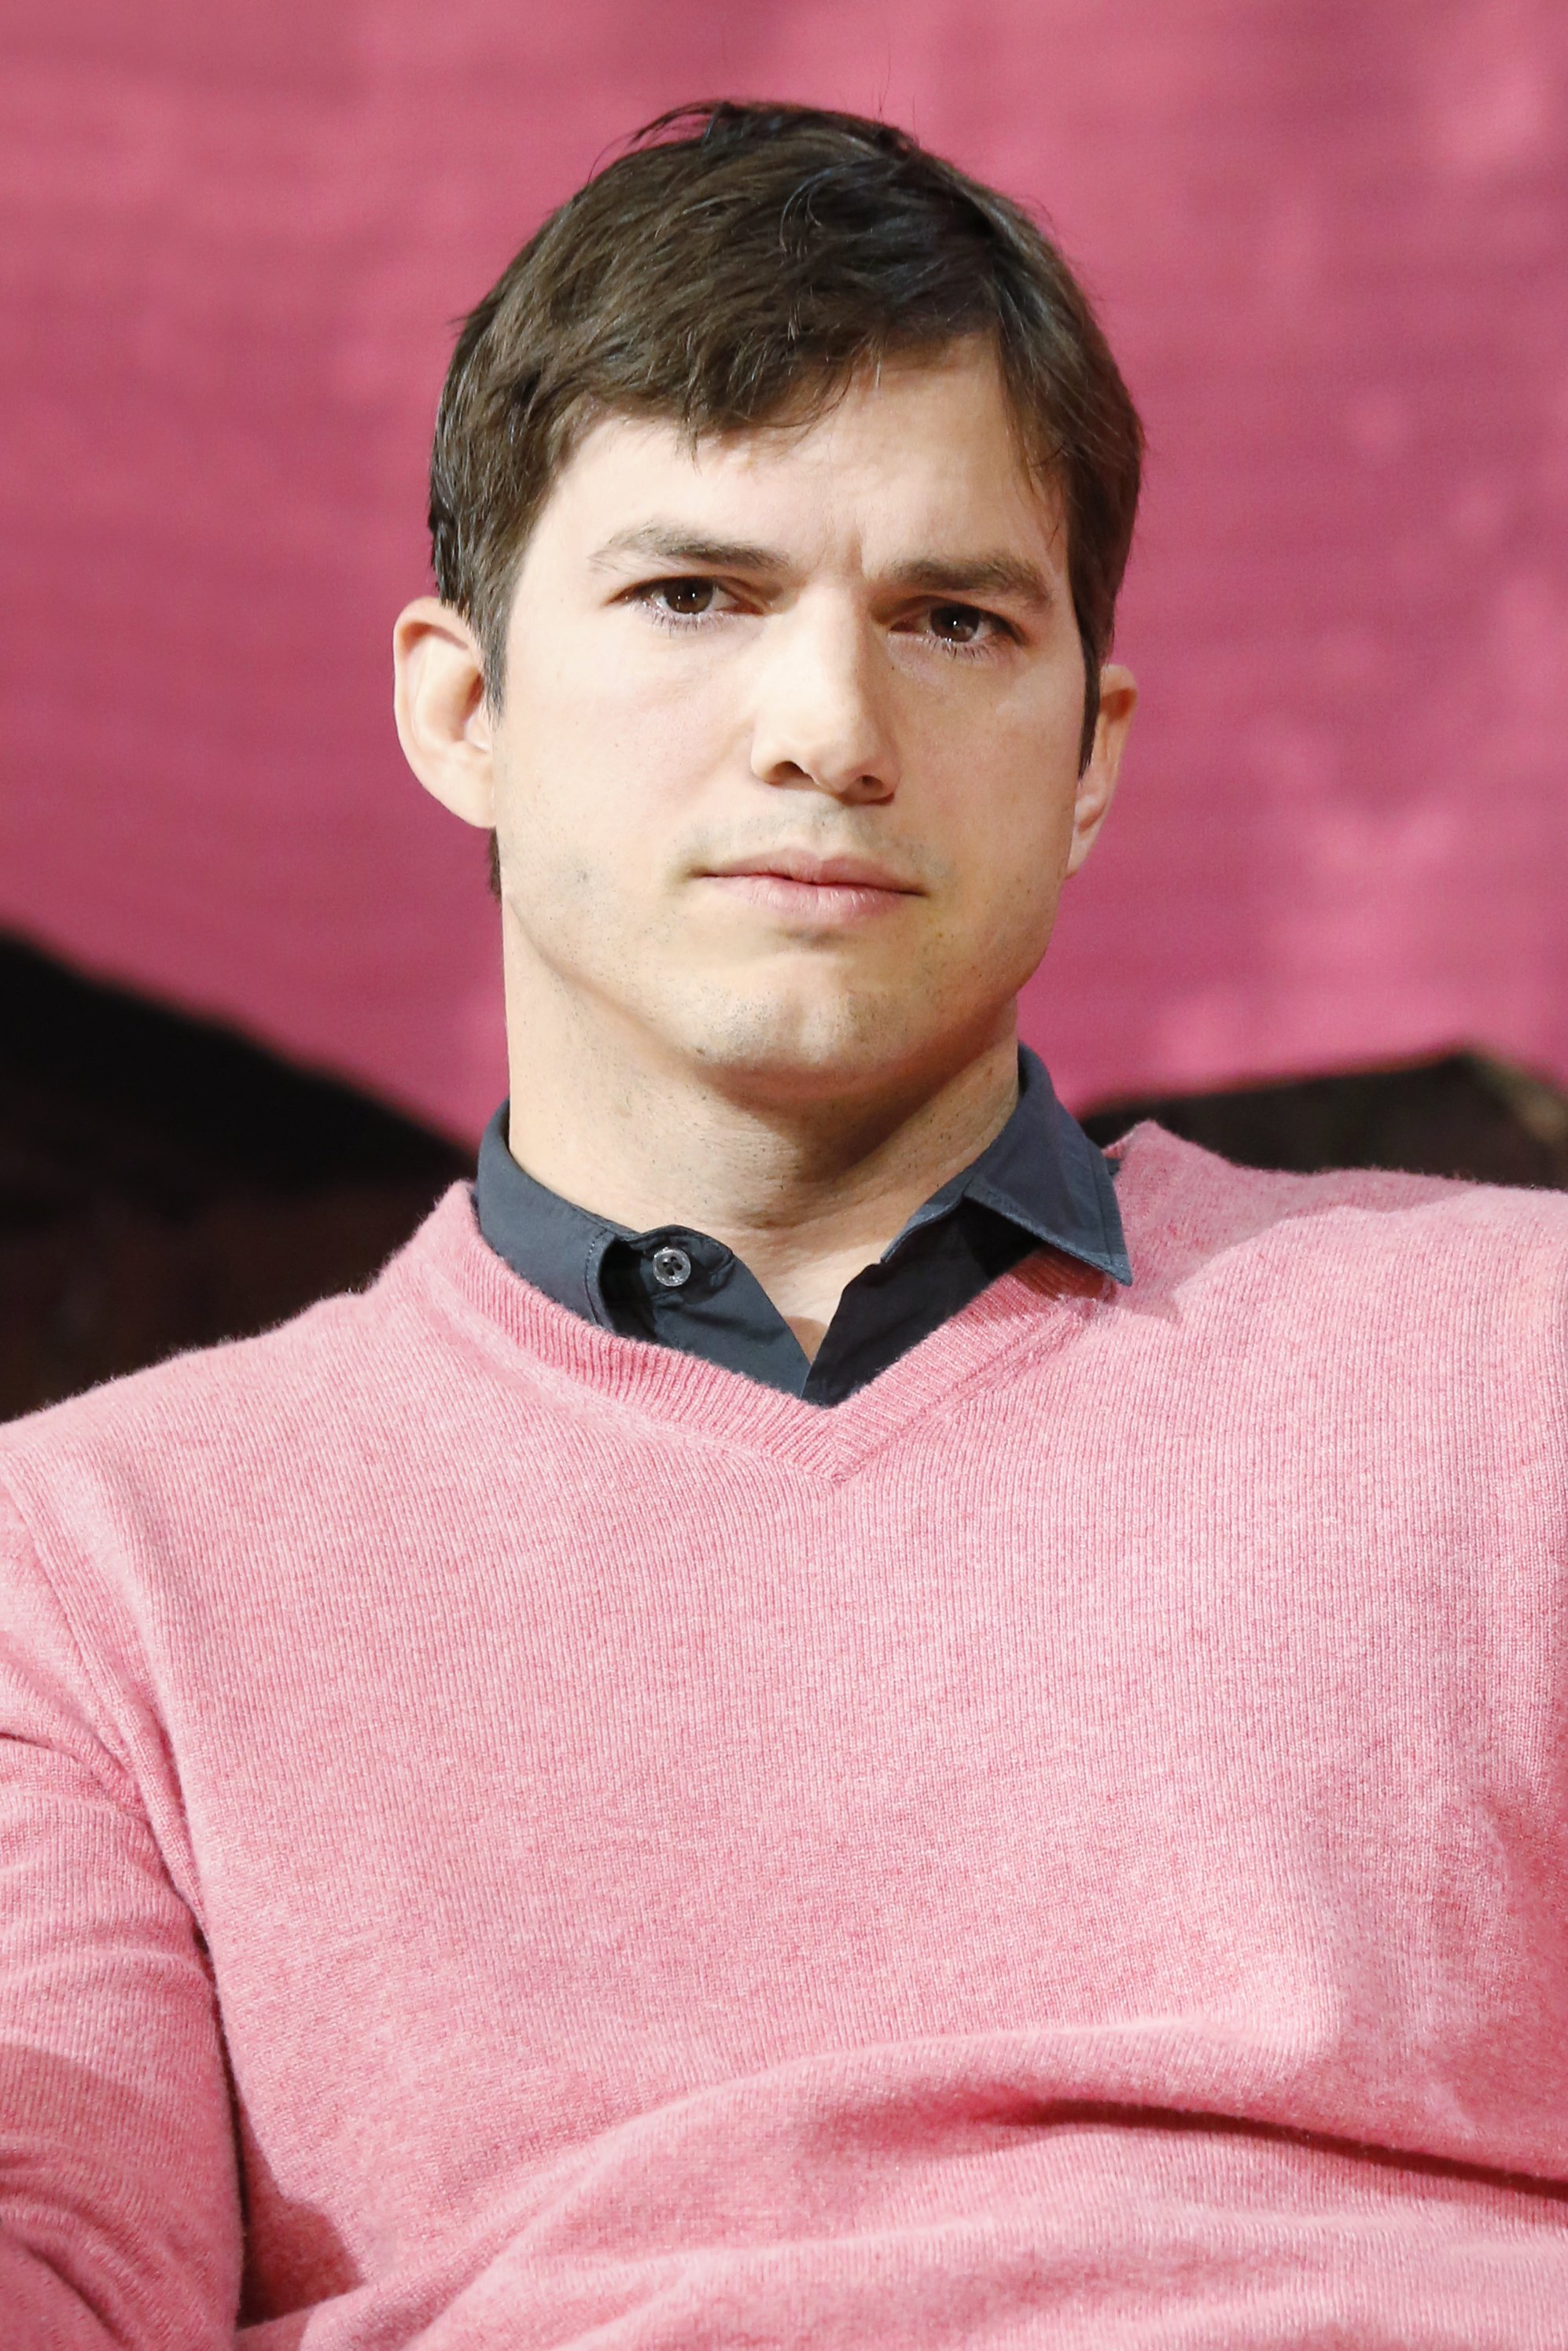 Ashton Kutcher in Los Angeles in 2017 | Source: Getty Images